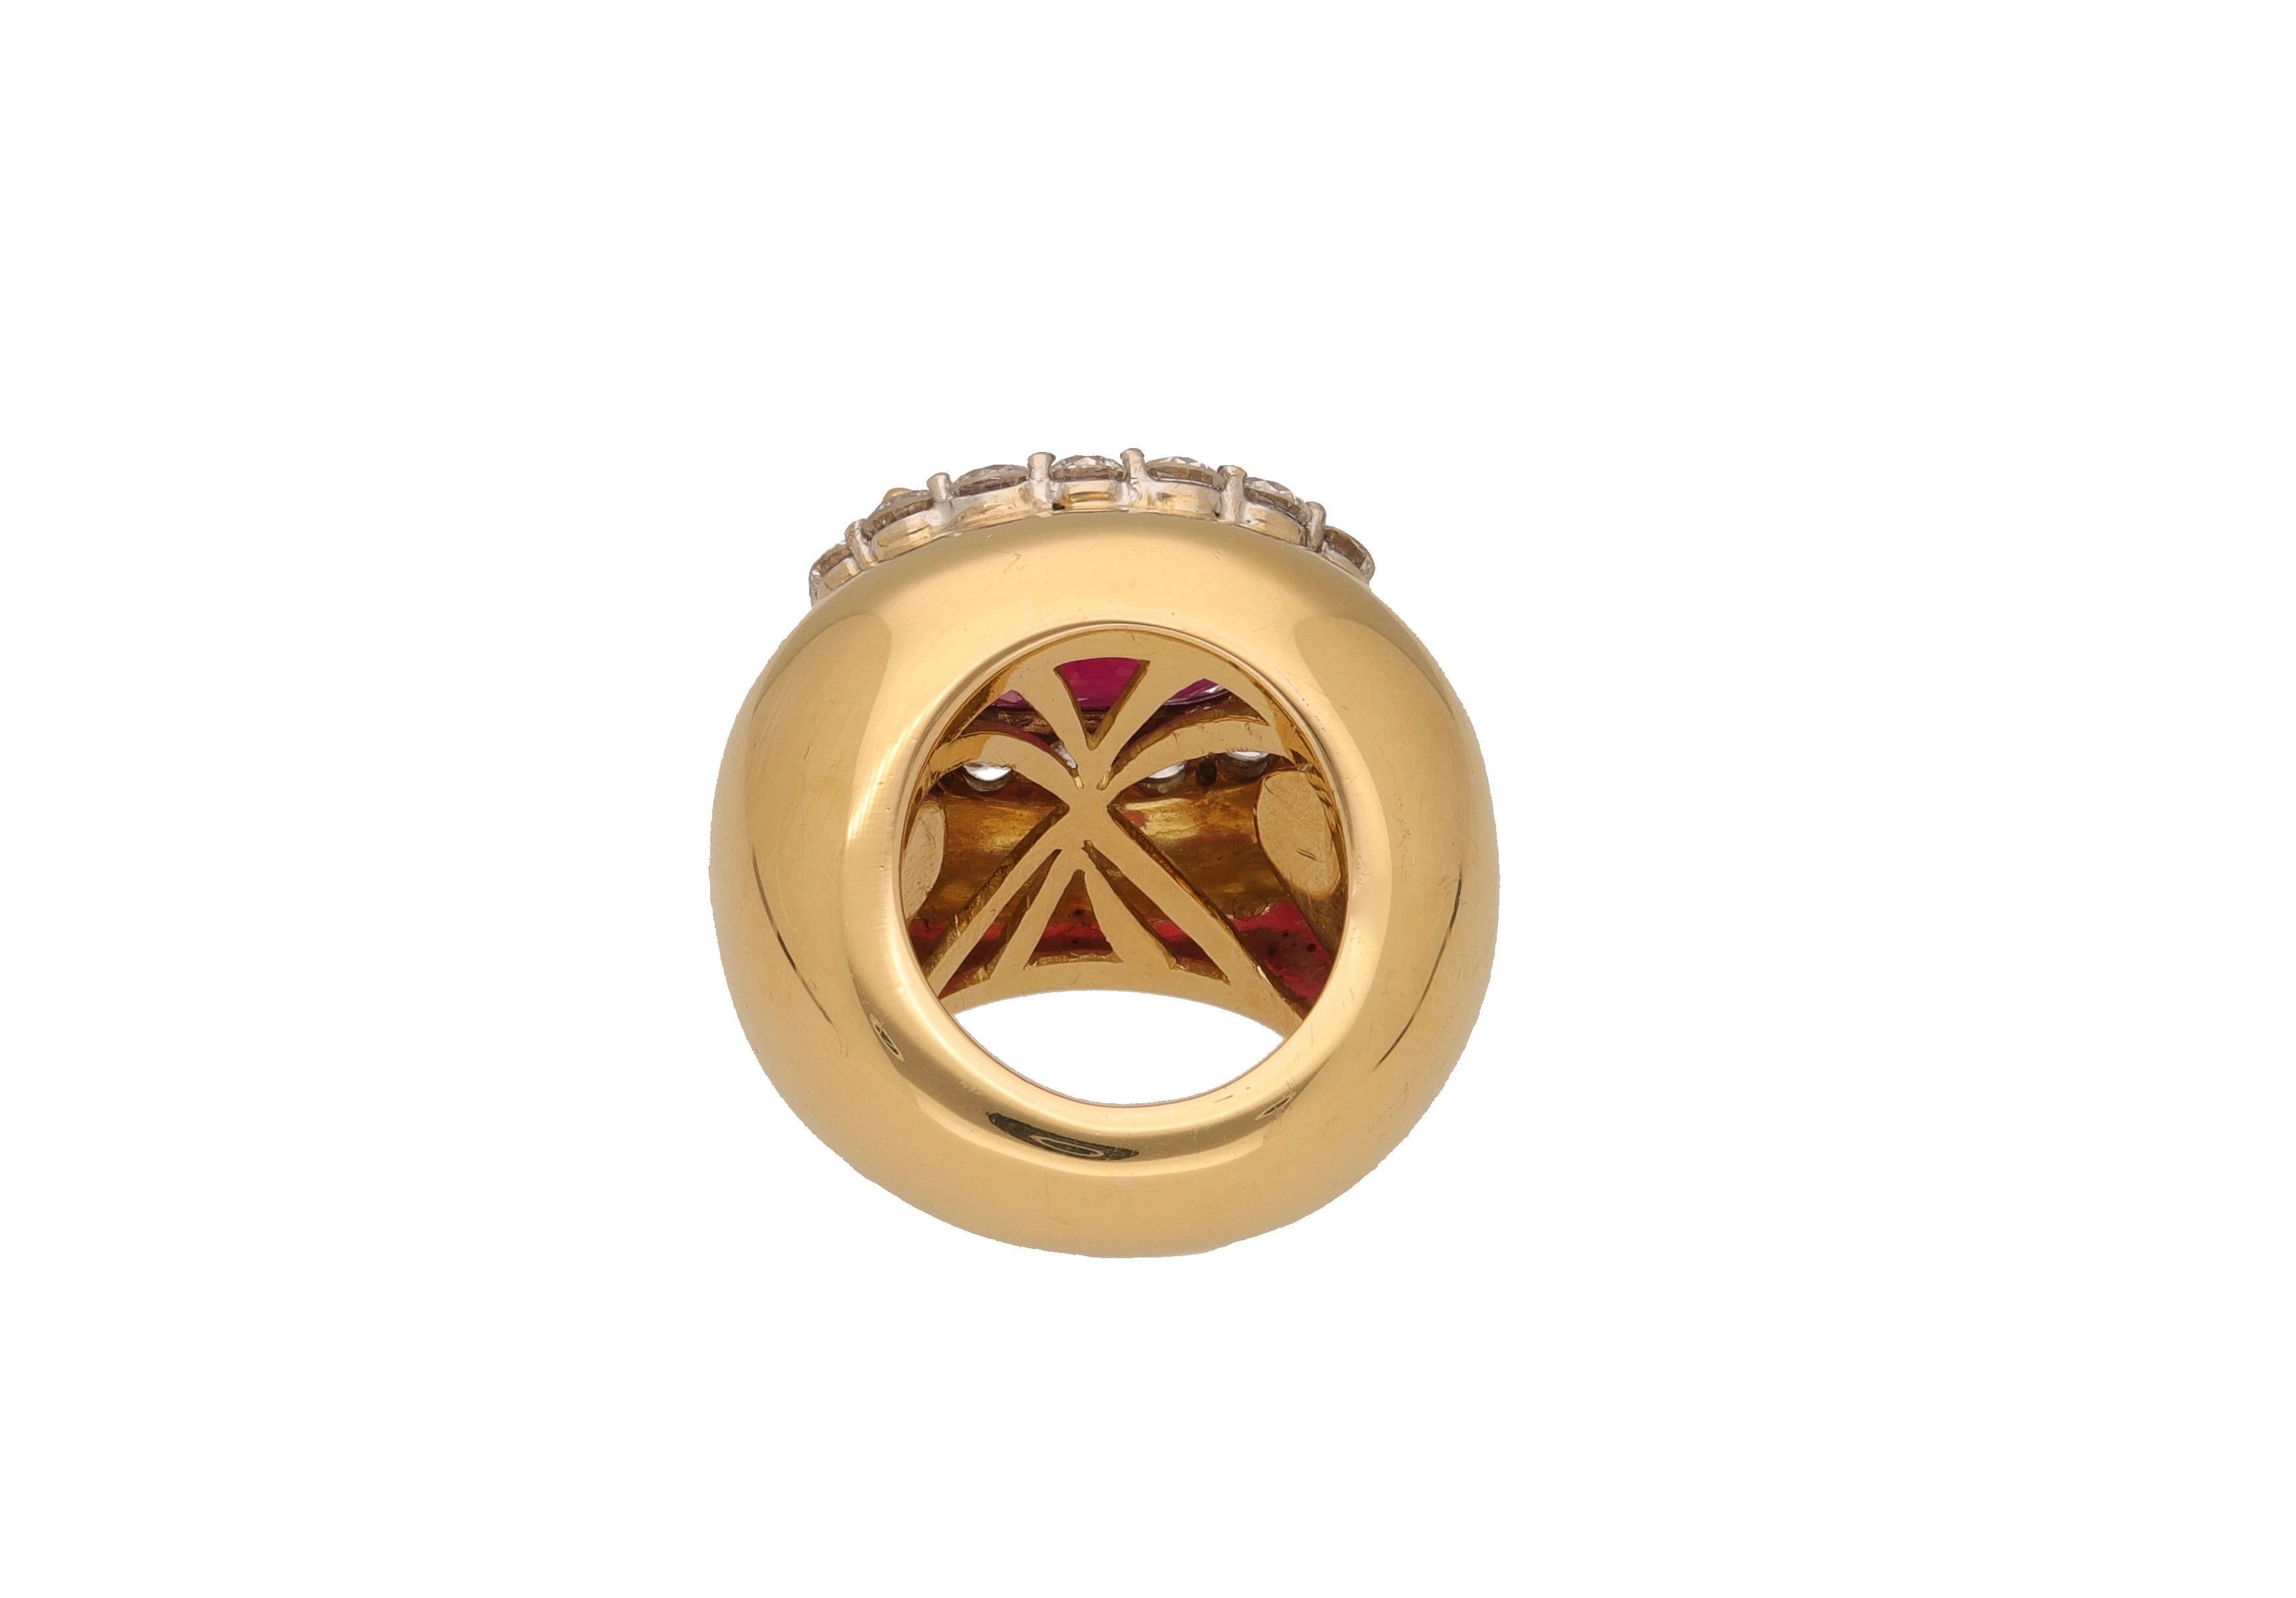 18 kt. yellow and white gold bombe ring with diamonds and tourmaline.
Diamonds: 4.00 carat round-cut ( 16 stones )
Tourmaline: 11.50 carat oval-cut
The round-cut diamonds are embedded in 18 kt. white gold.
This impressive ring is hand-made in